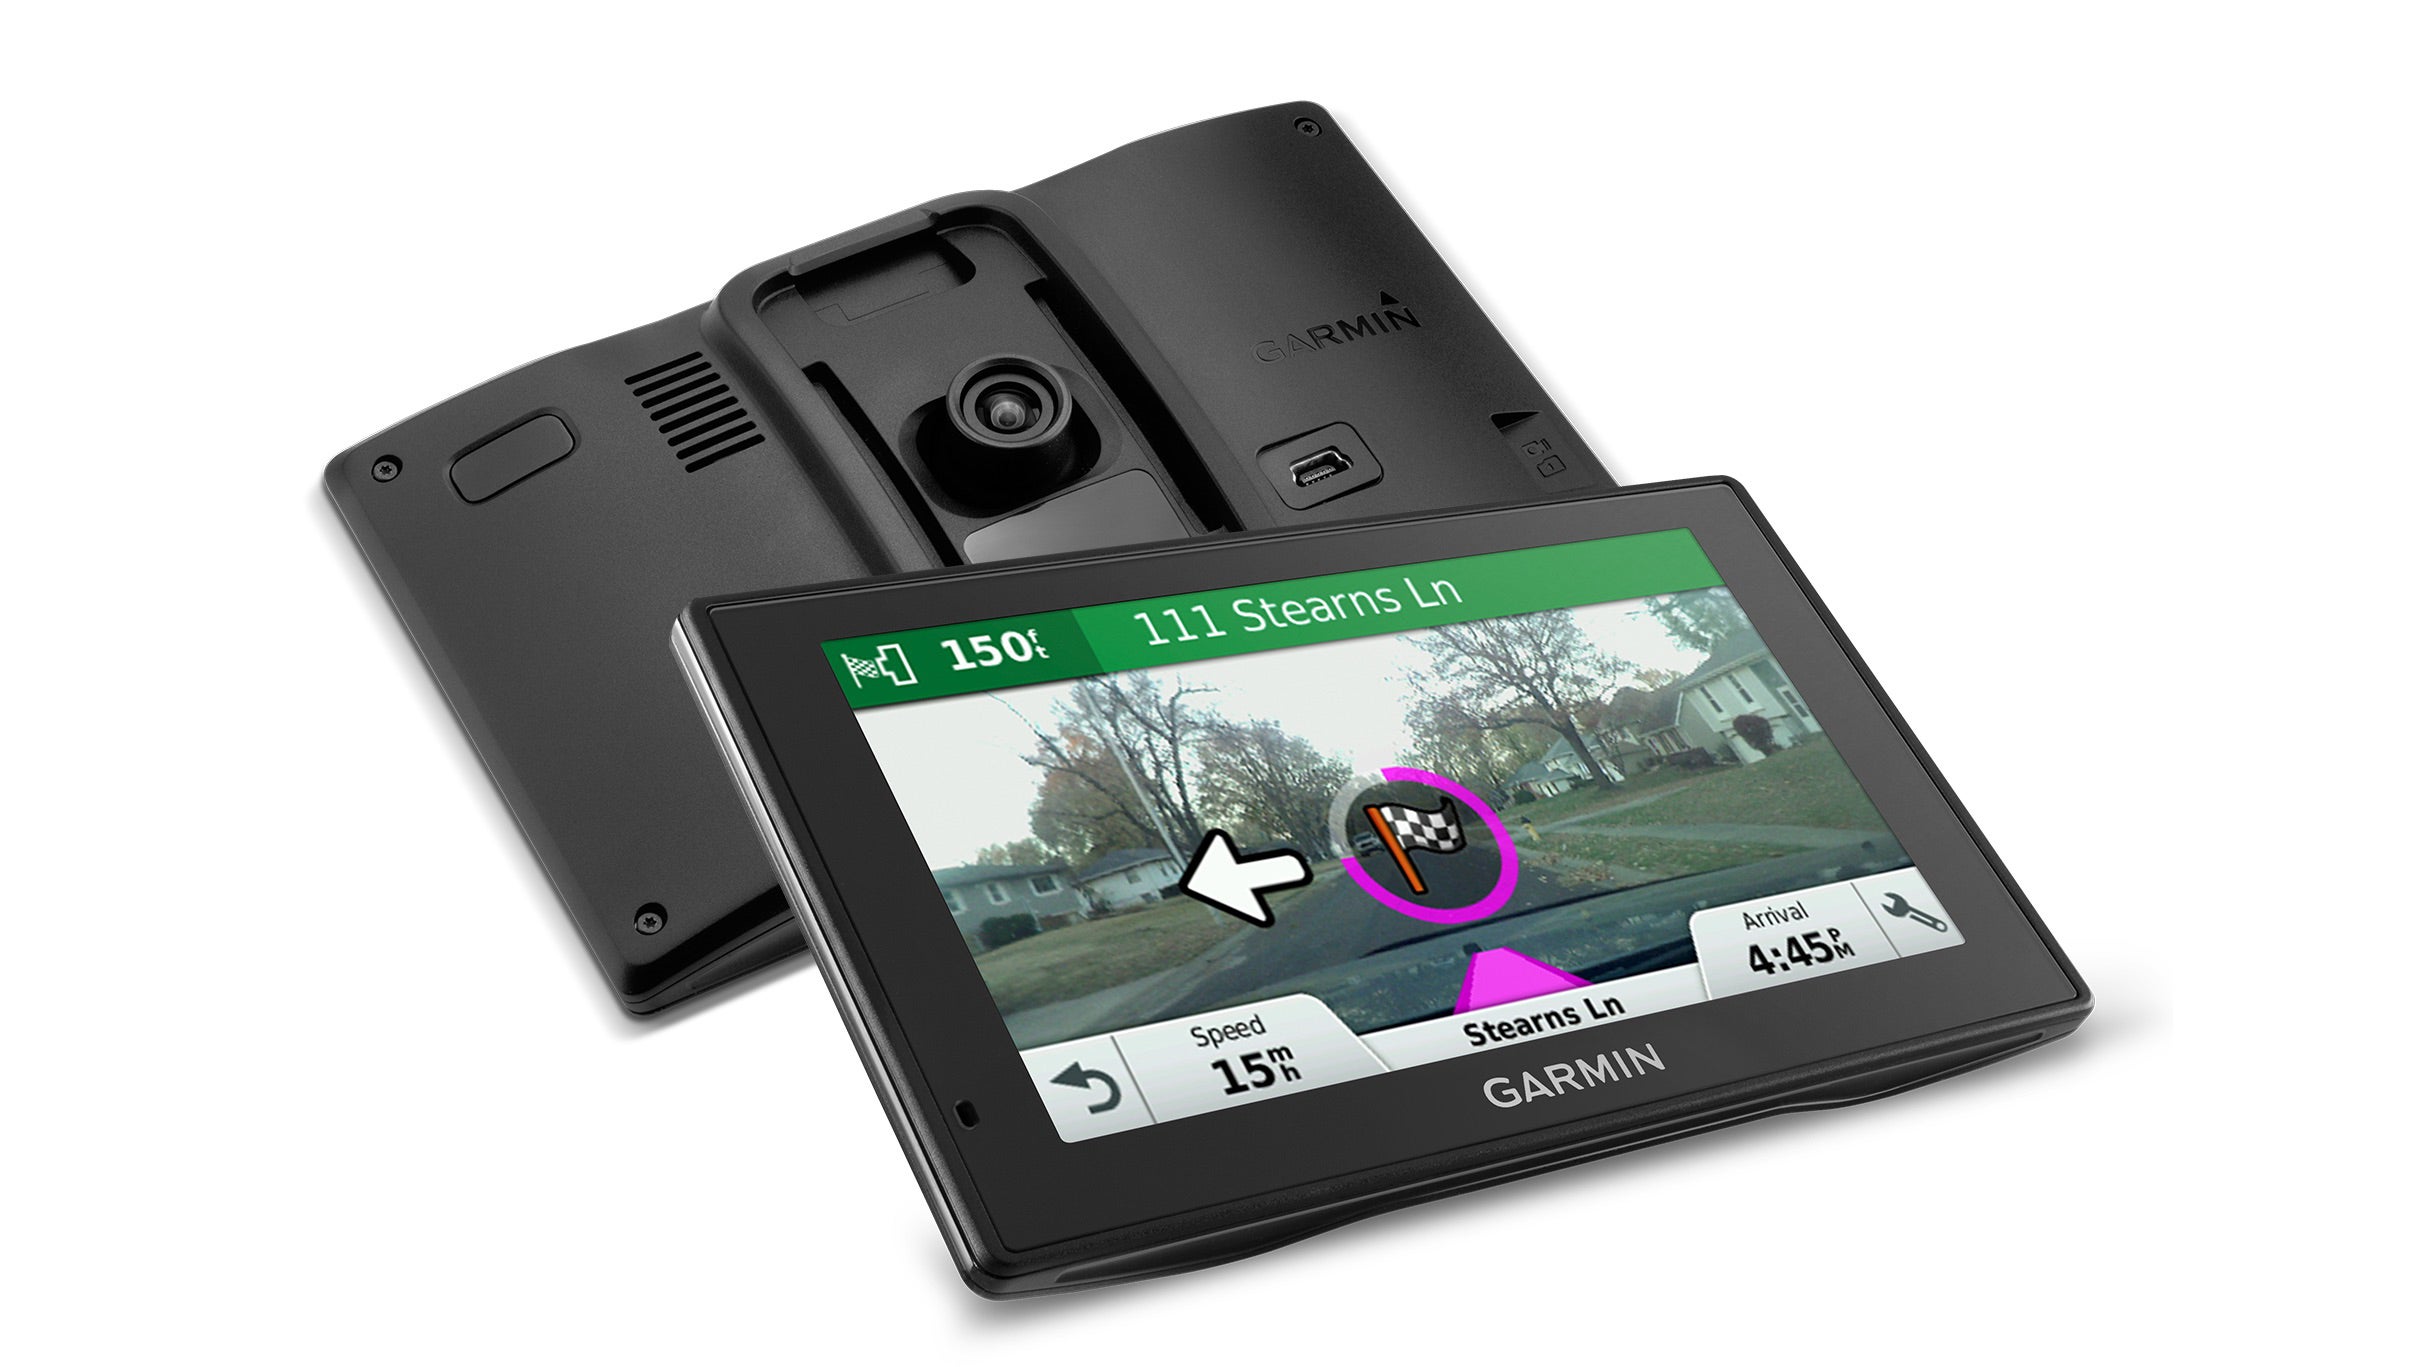 will do reputation Motel Garmin DriveAssist 50LMT-D Review | Trusted Reviews